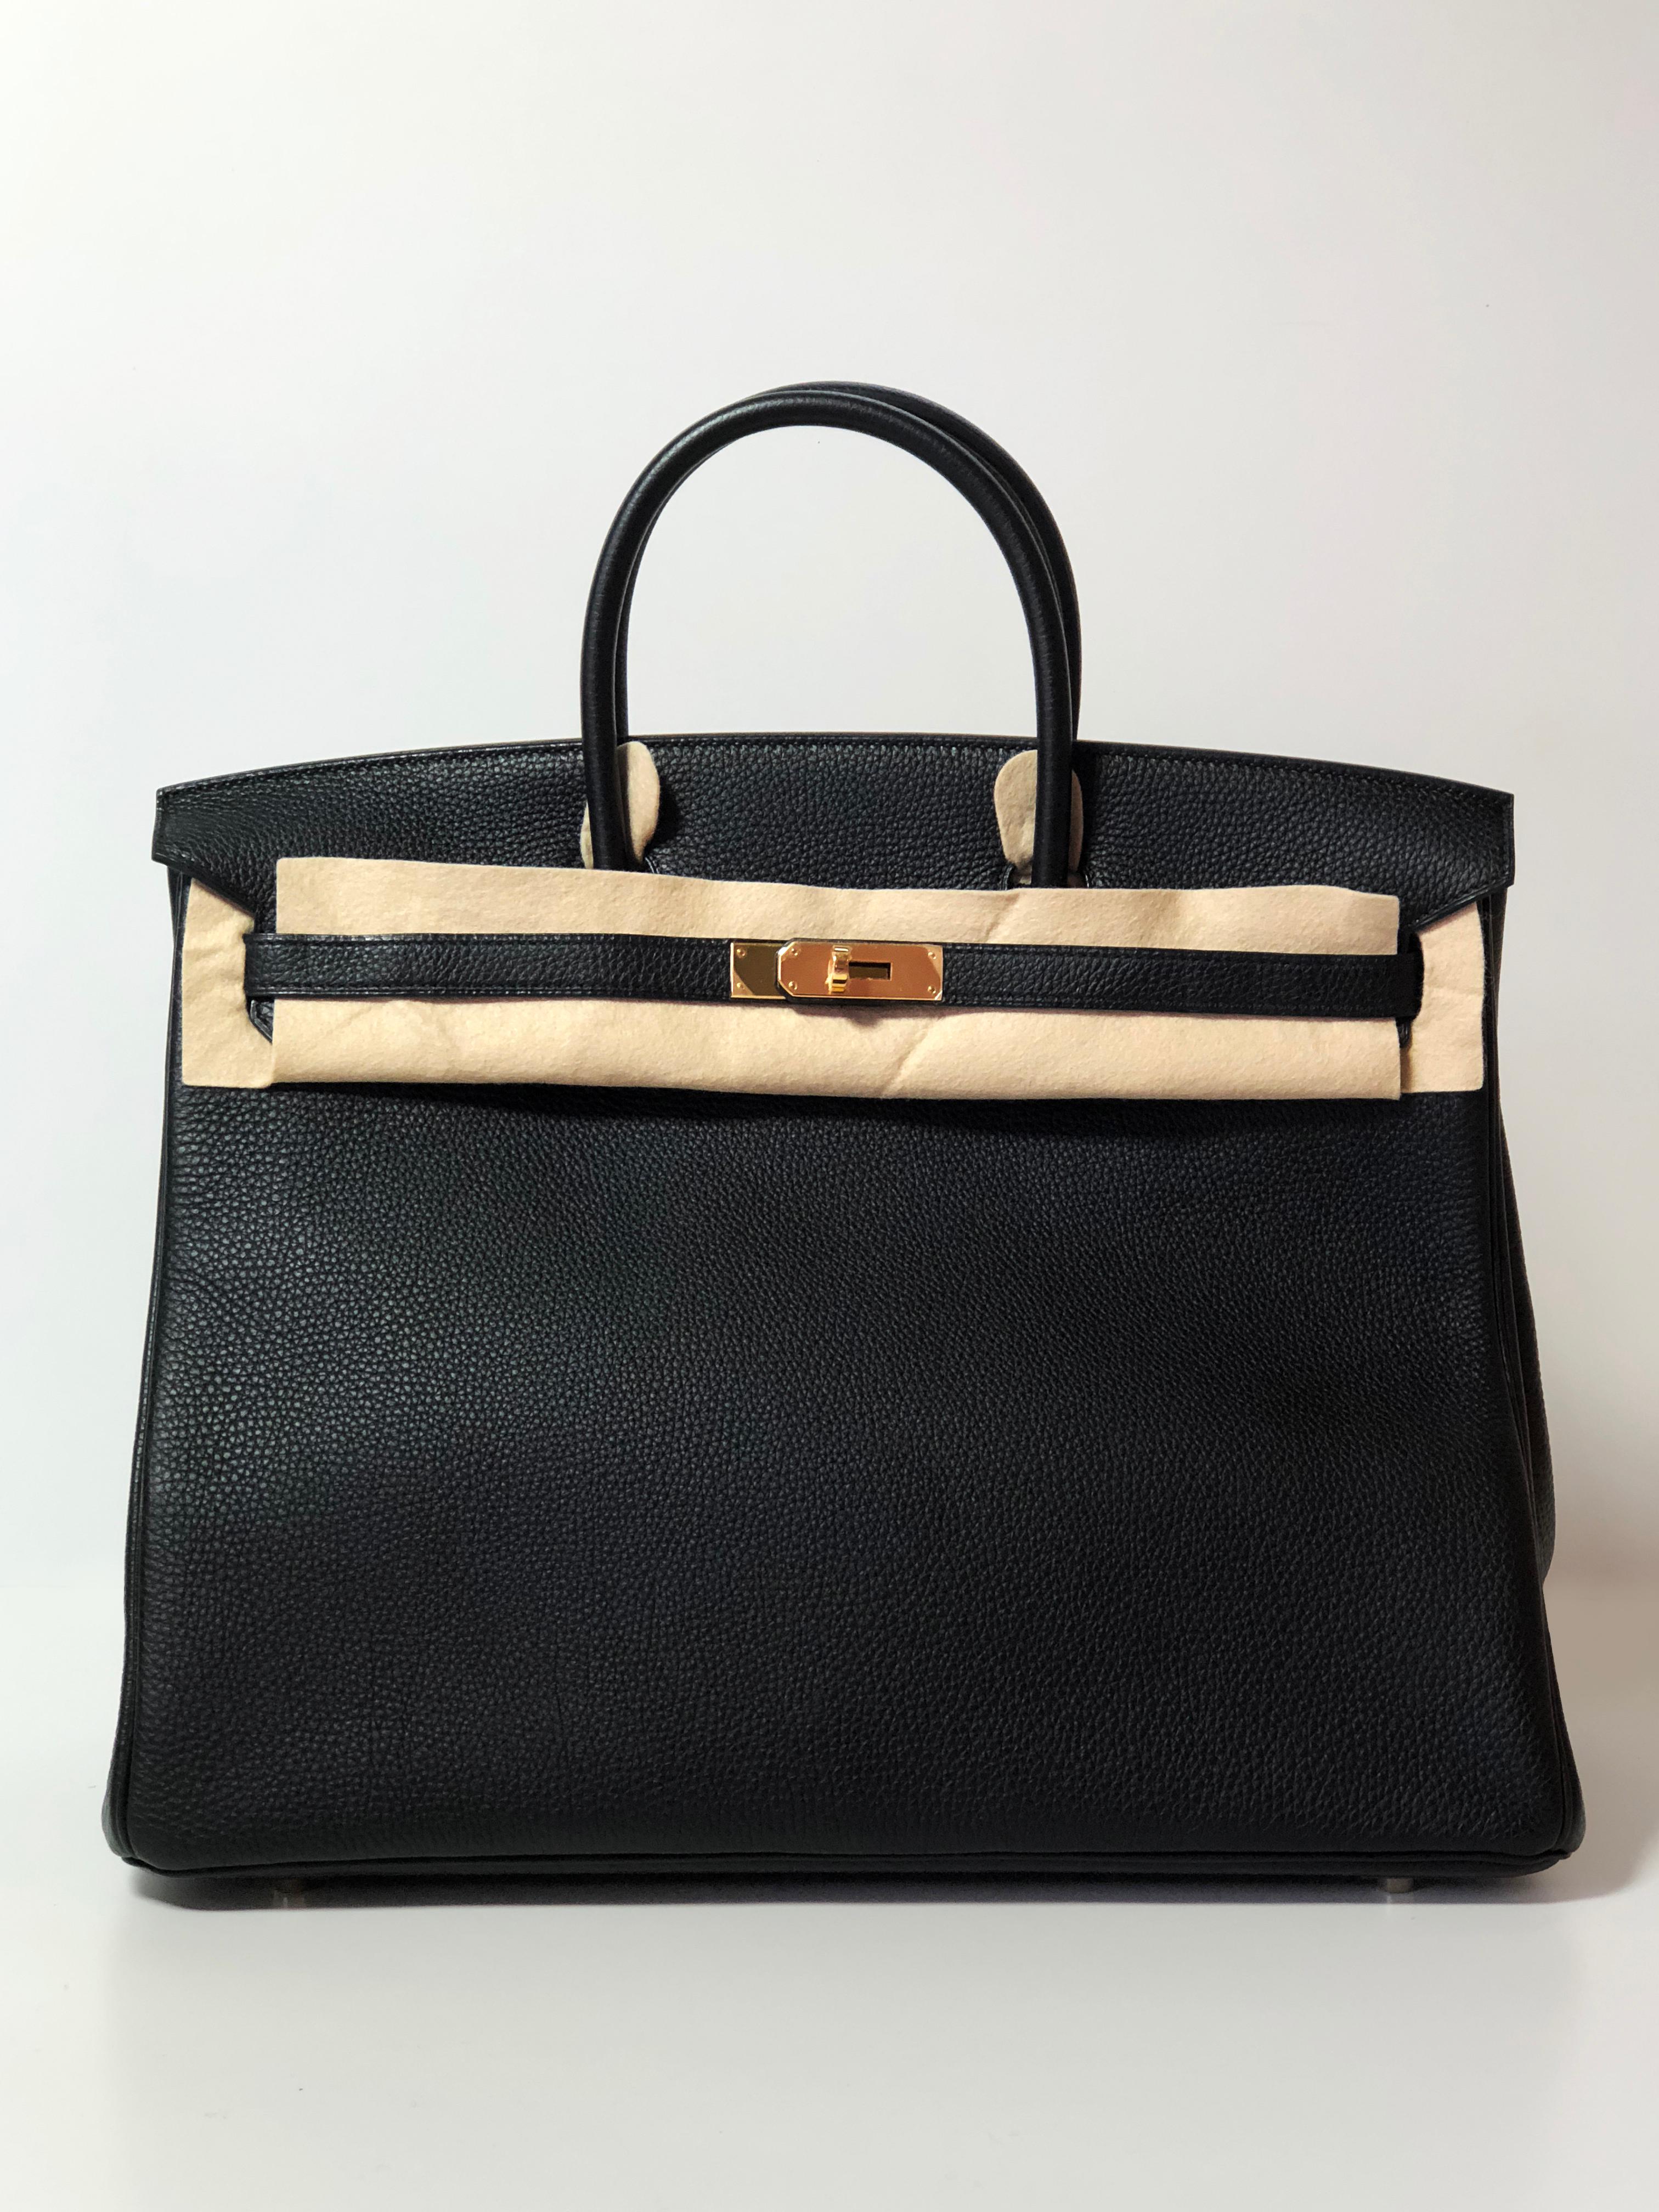 Hermes Birkin 40cm, Togo Black Leather Gold Hardware In Excellent Condition In London, GB